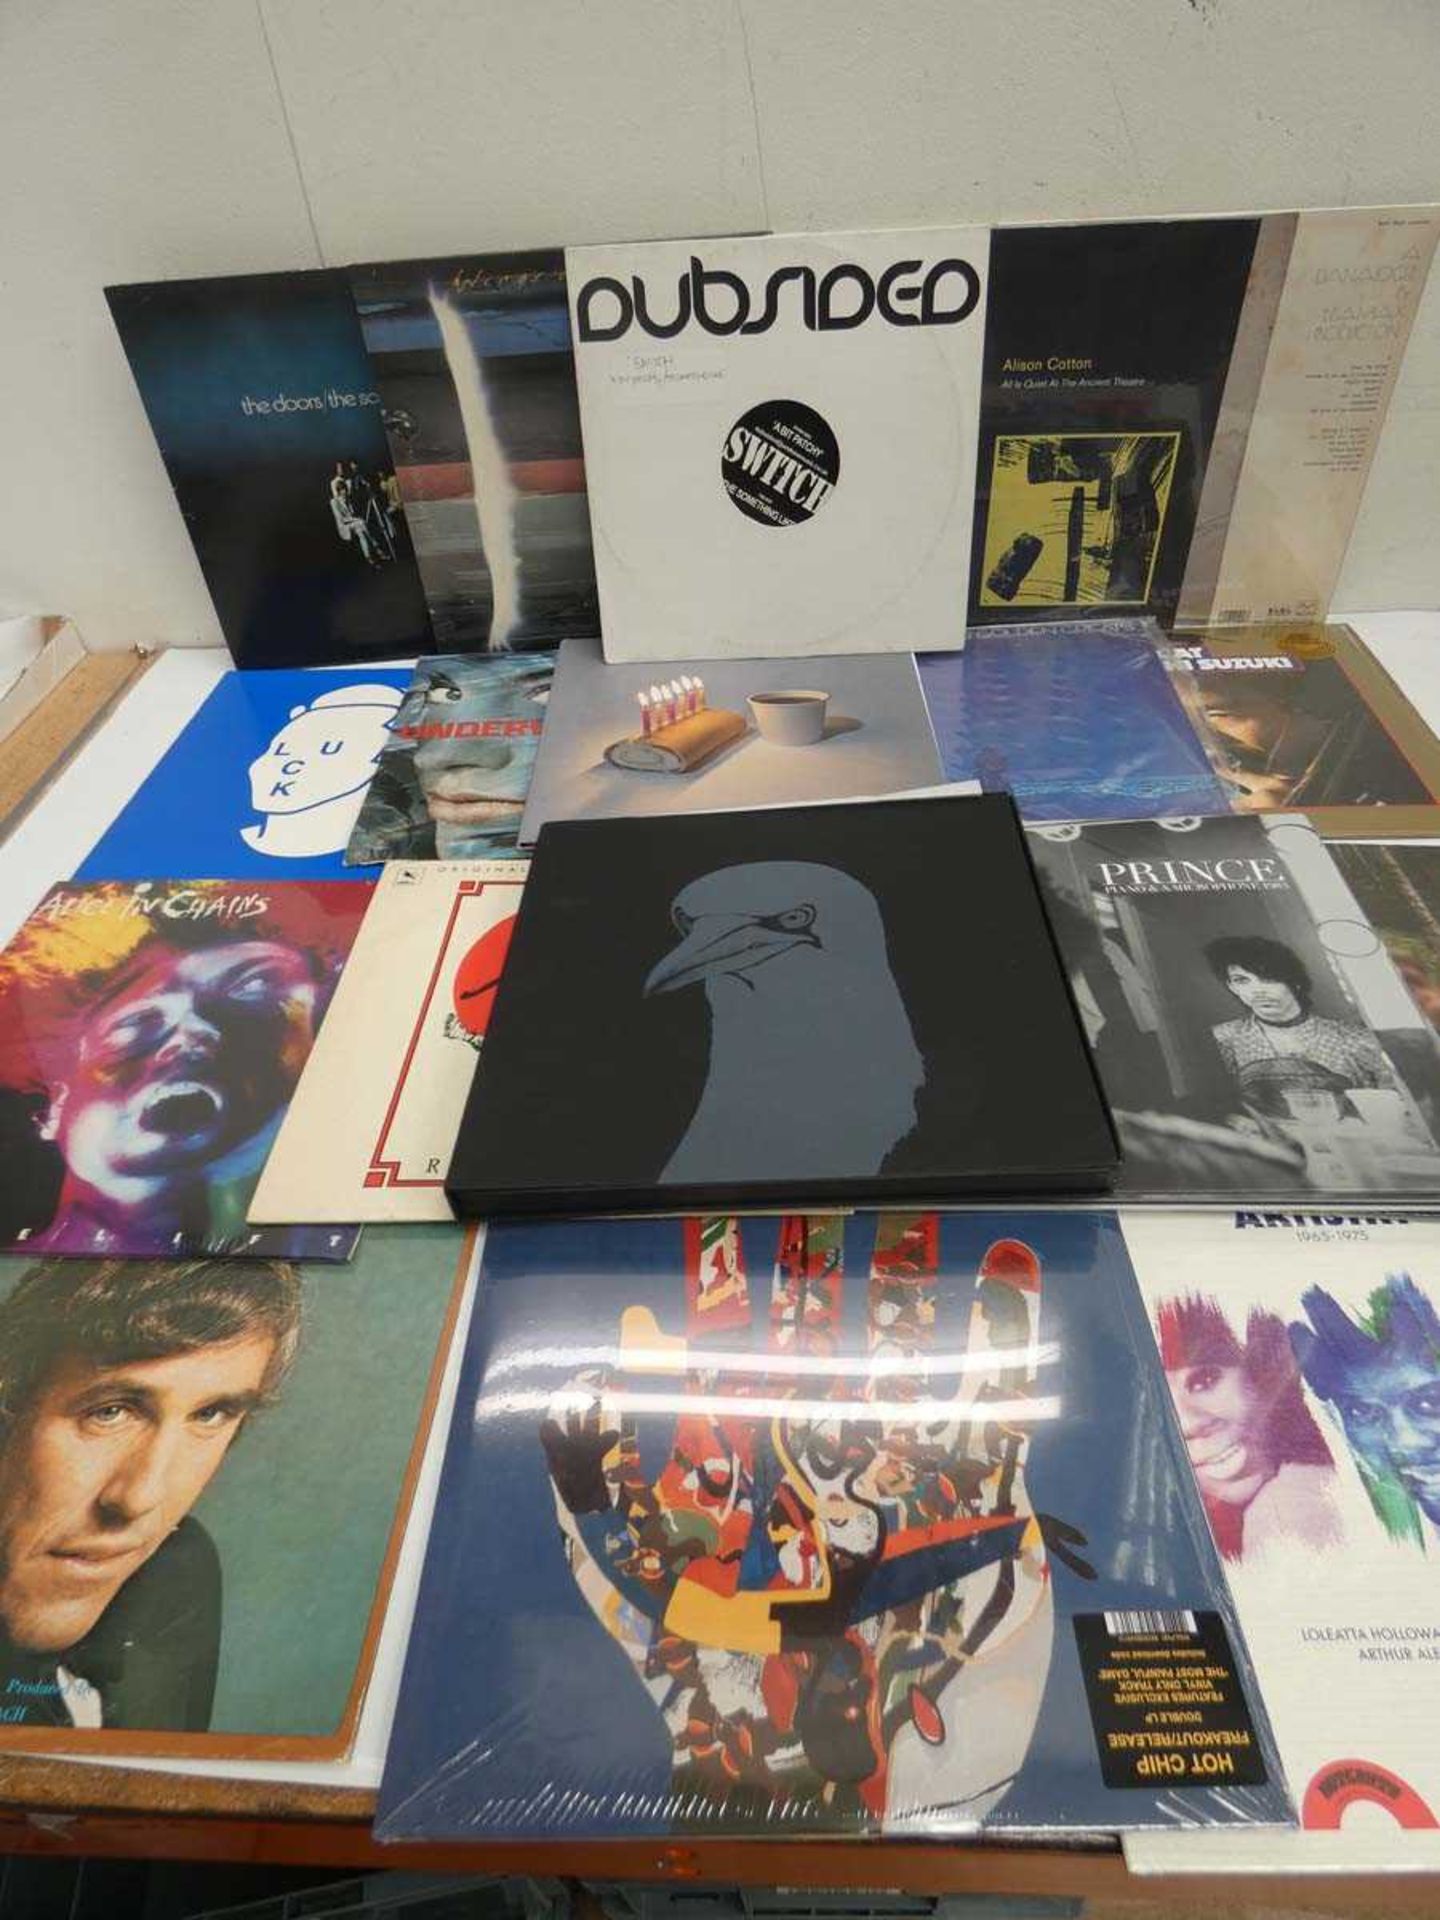 +VAT Box containing LP and 45 vinyl records to include The Doors, Prince, Alice in Chains and